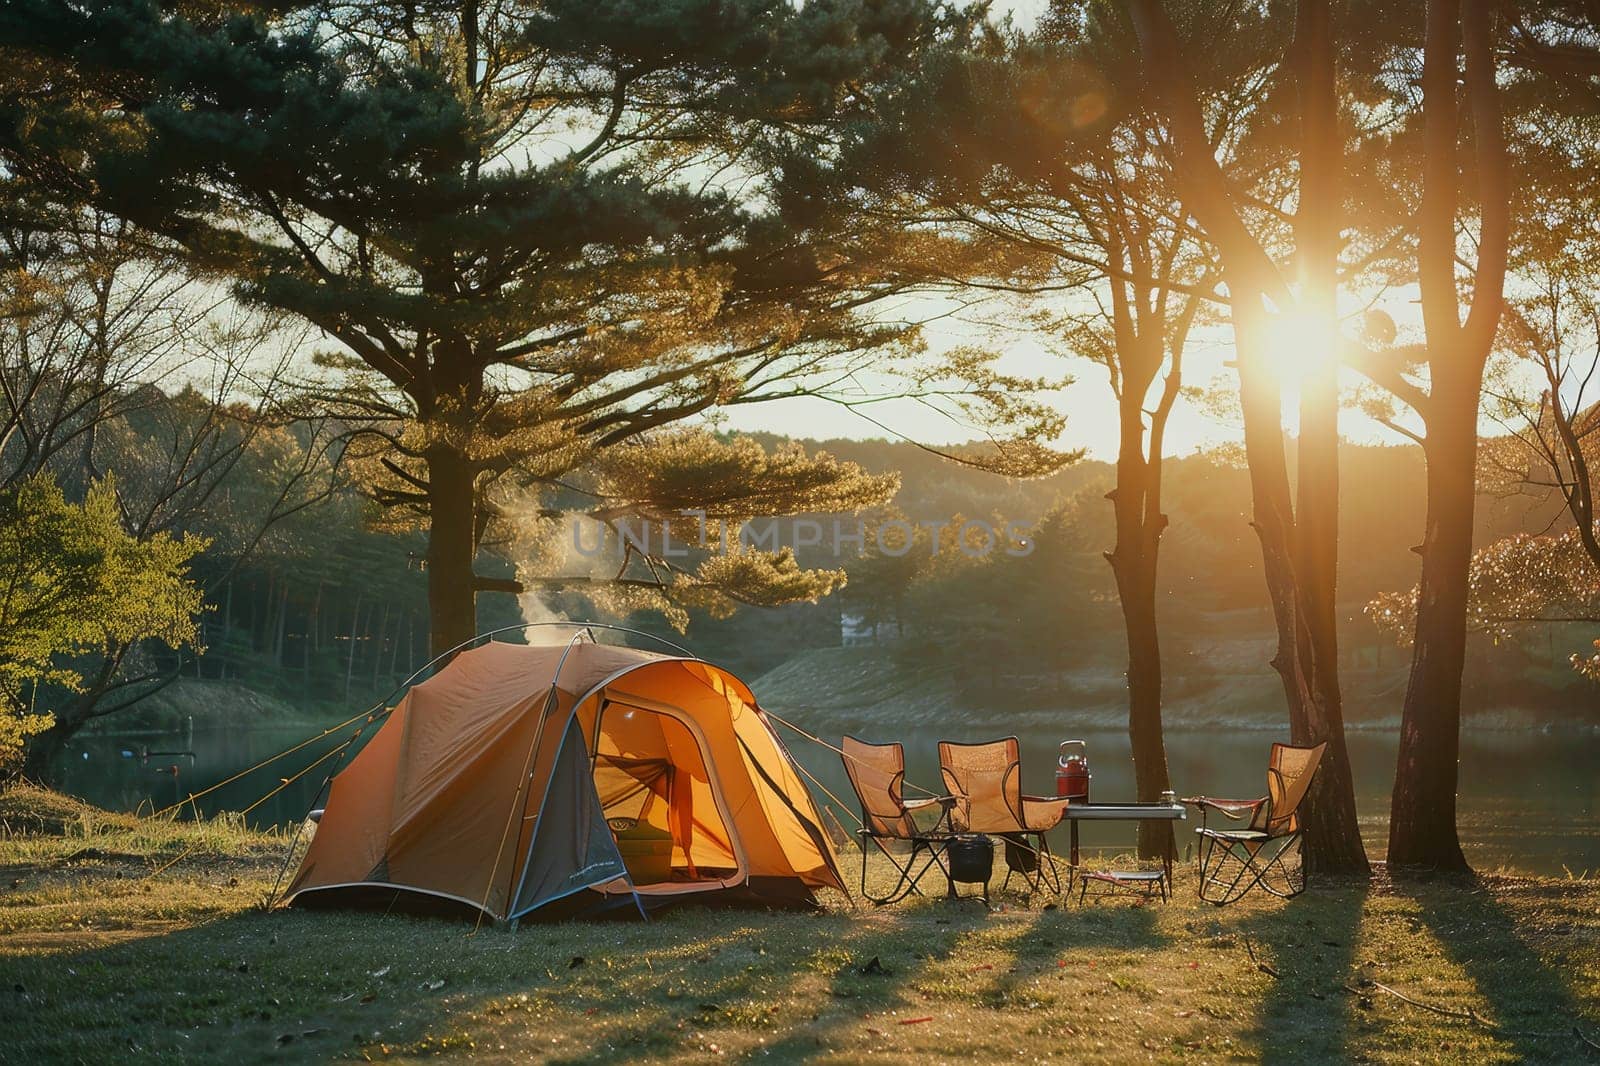 Camping outdoors with lots of sunlight. tent, chairs, a tent BBQ rack, and more by Manastrong